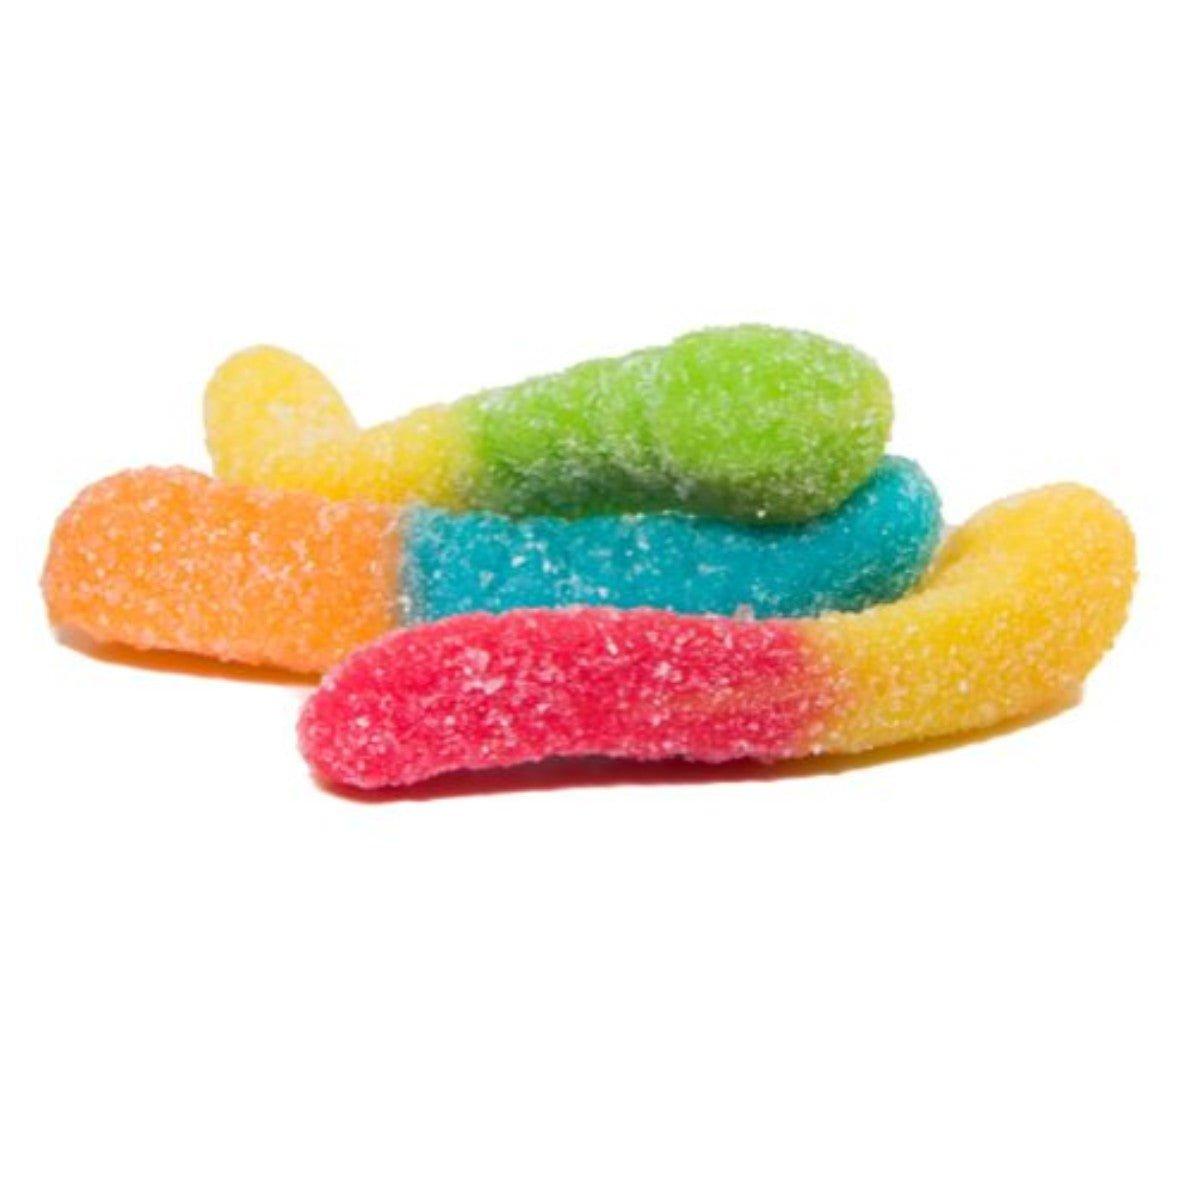 STMS WLLNSS 250mg or 500mg Gummy FRUIT CHEWS - ID Delivery Service